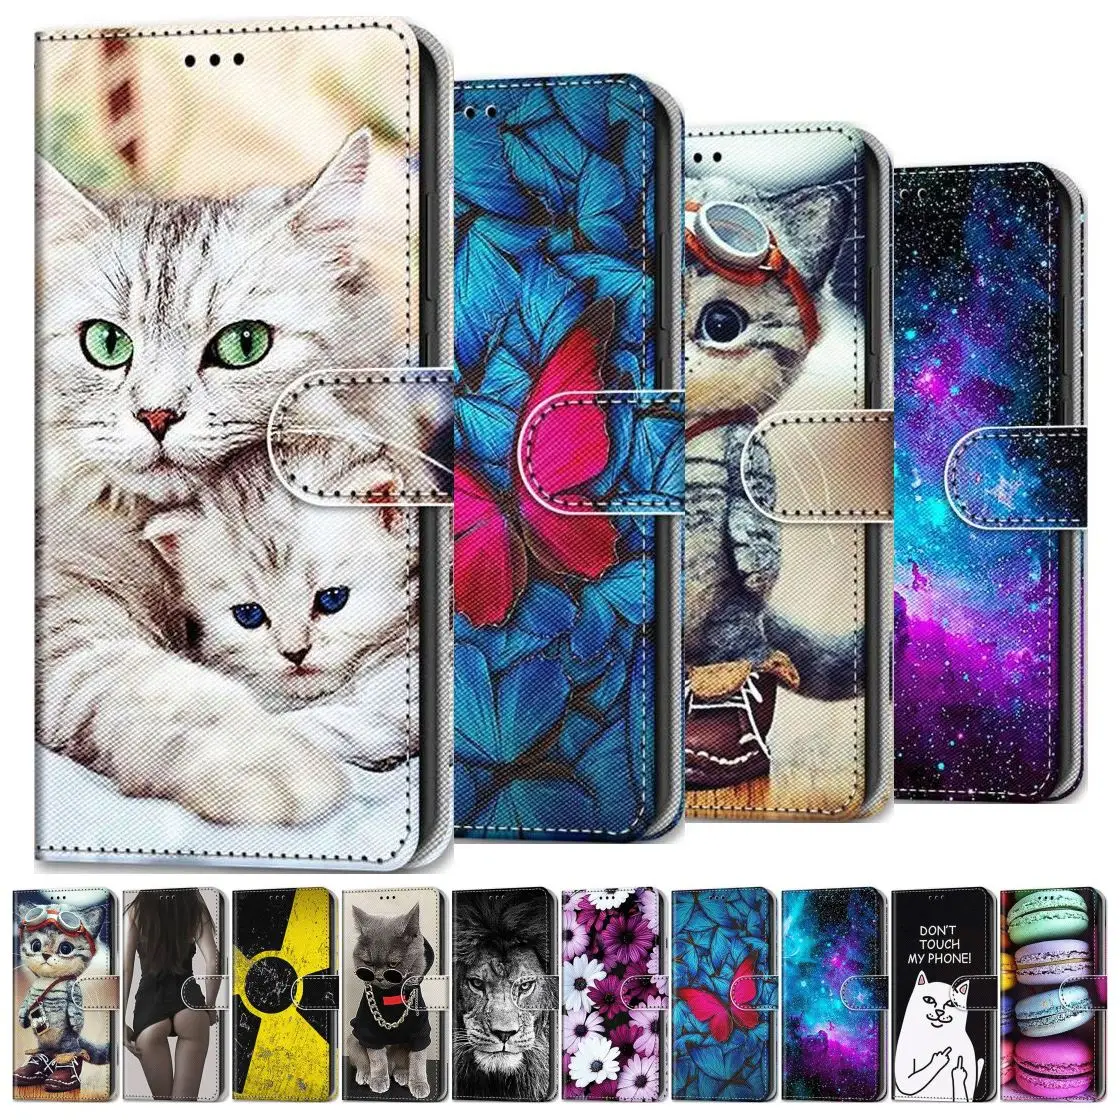 

Patterned Flip Leather Wallet Case For Redmi Note 9 Pro 8T 8 7 Pro Redmi 9C 9A 9 8 7 Cat Lion Butterfly Girls Cute Cover DP08F